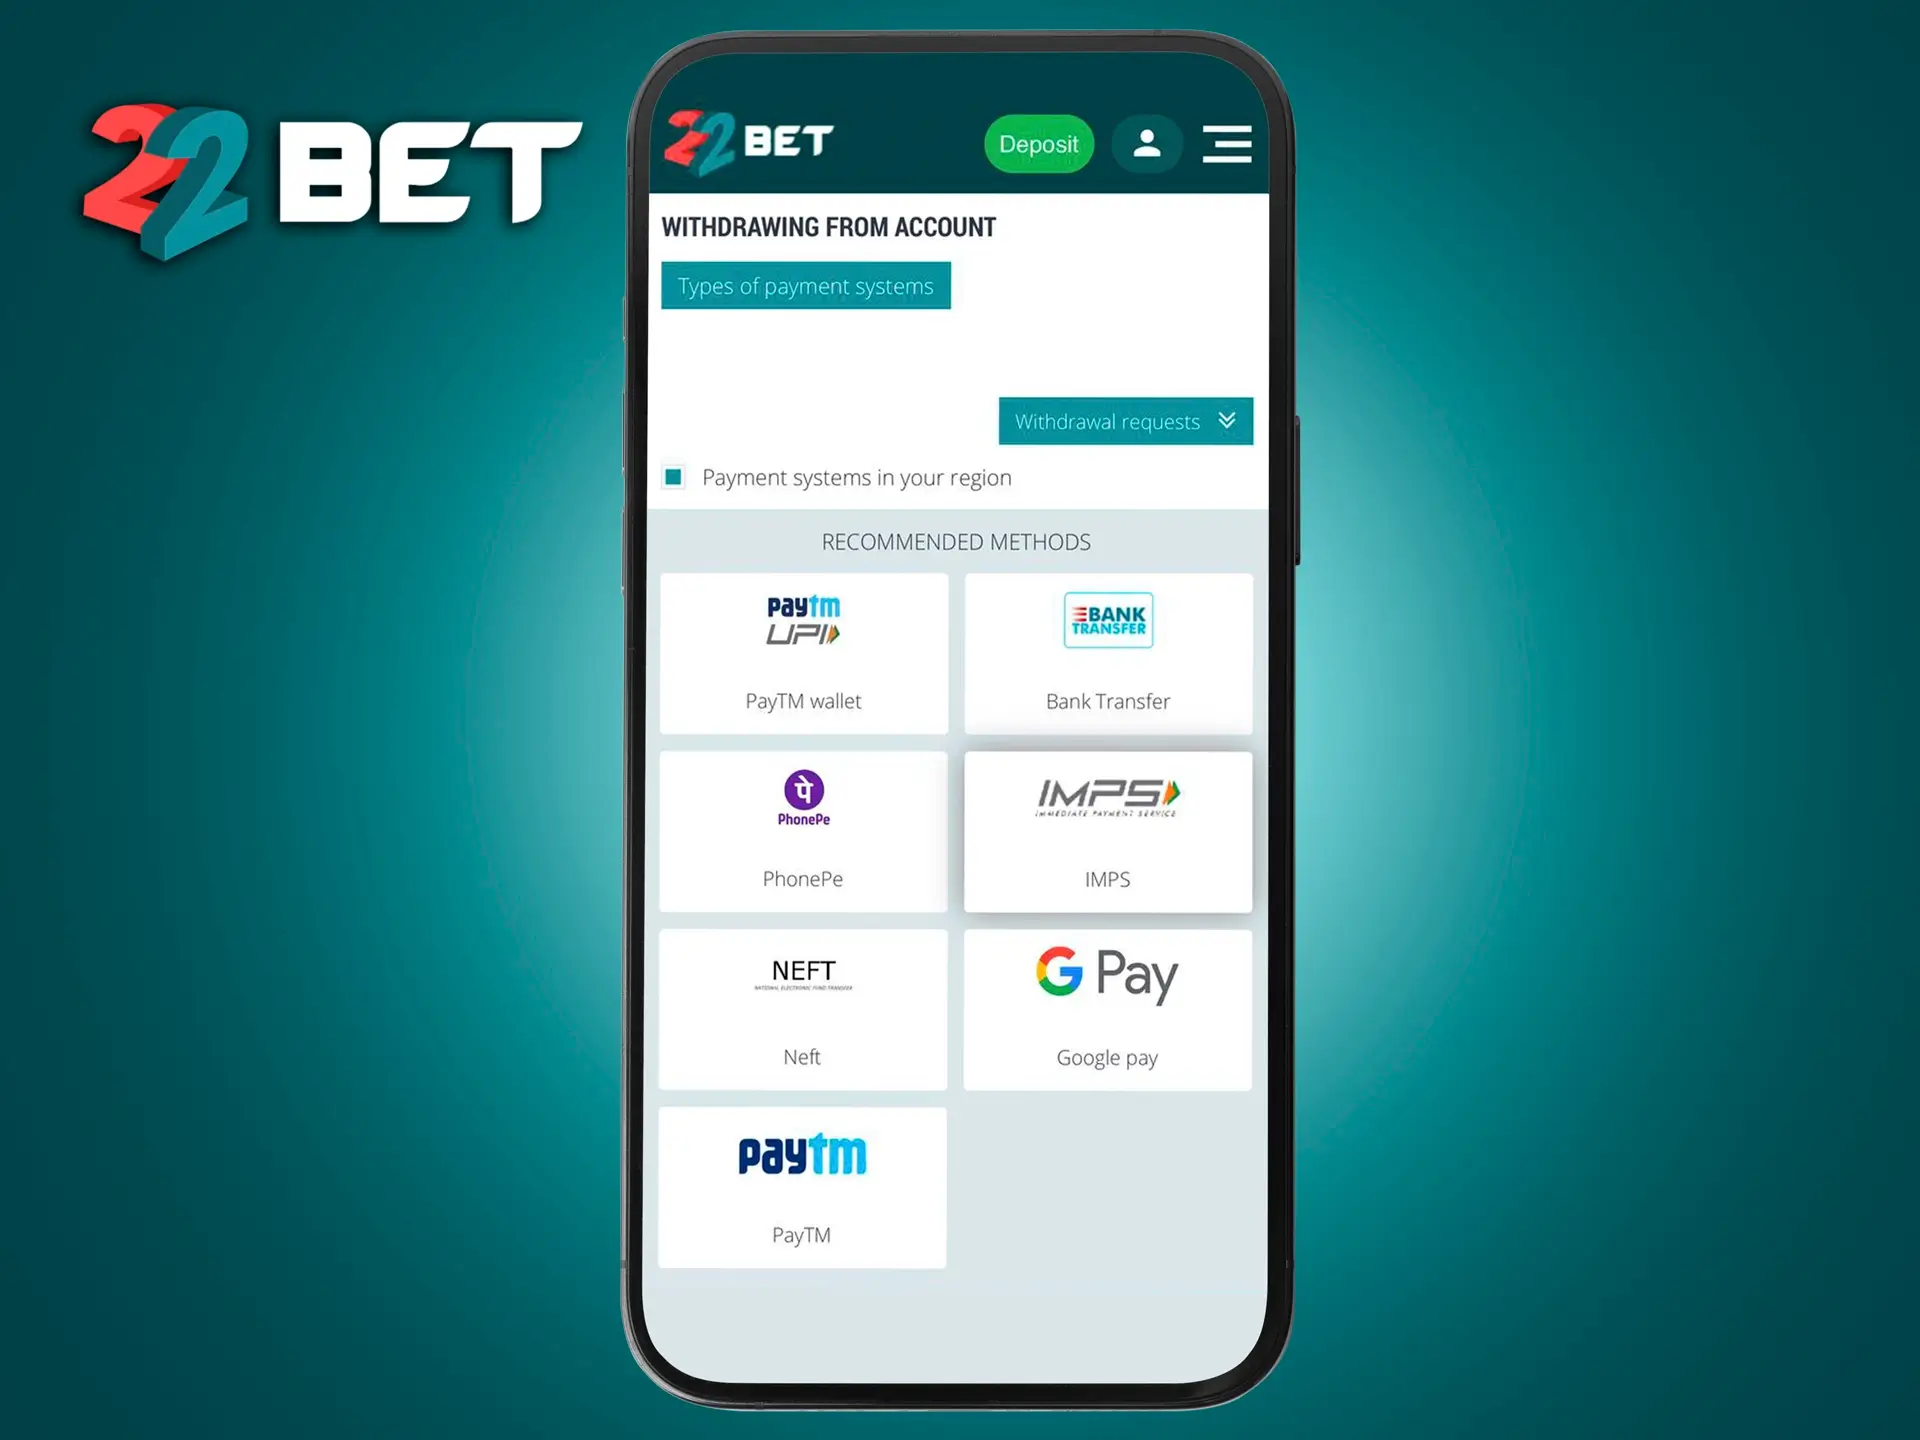 Use a withdrawal method at 22Bet Casino that is convenient for you.